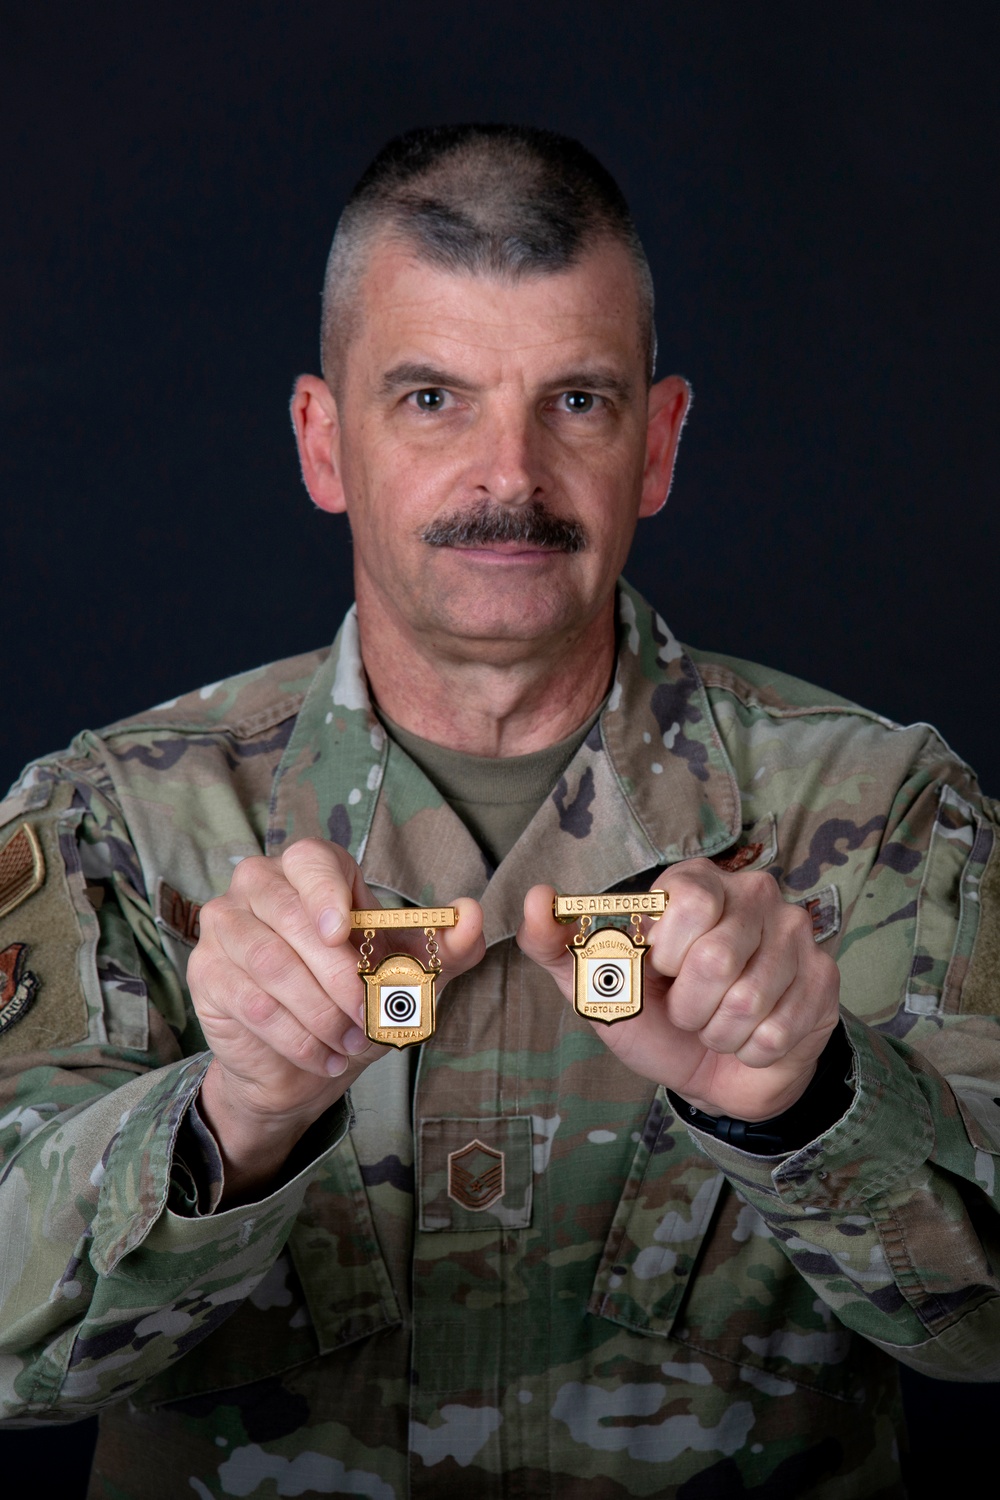 167th Airlift Wing marksman earns second Air Force distinguished shooter badge